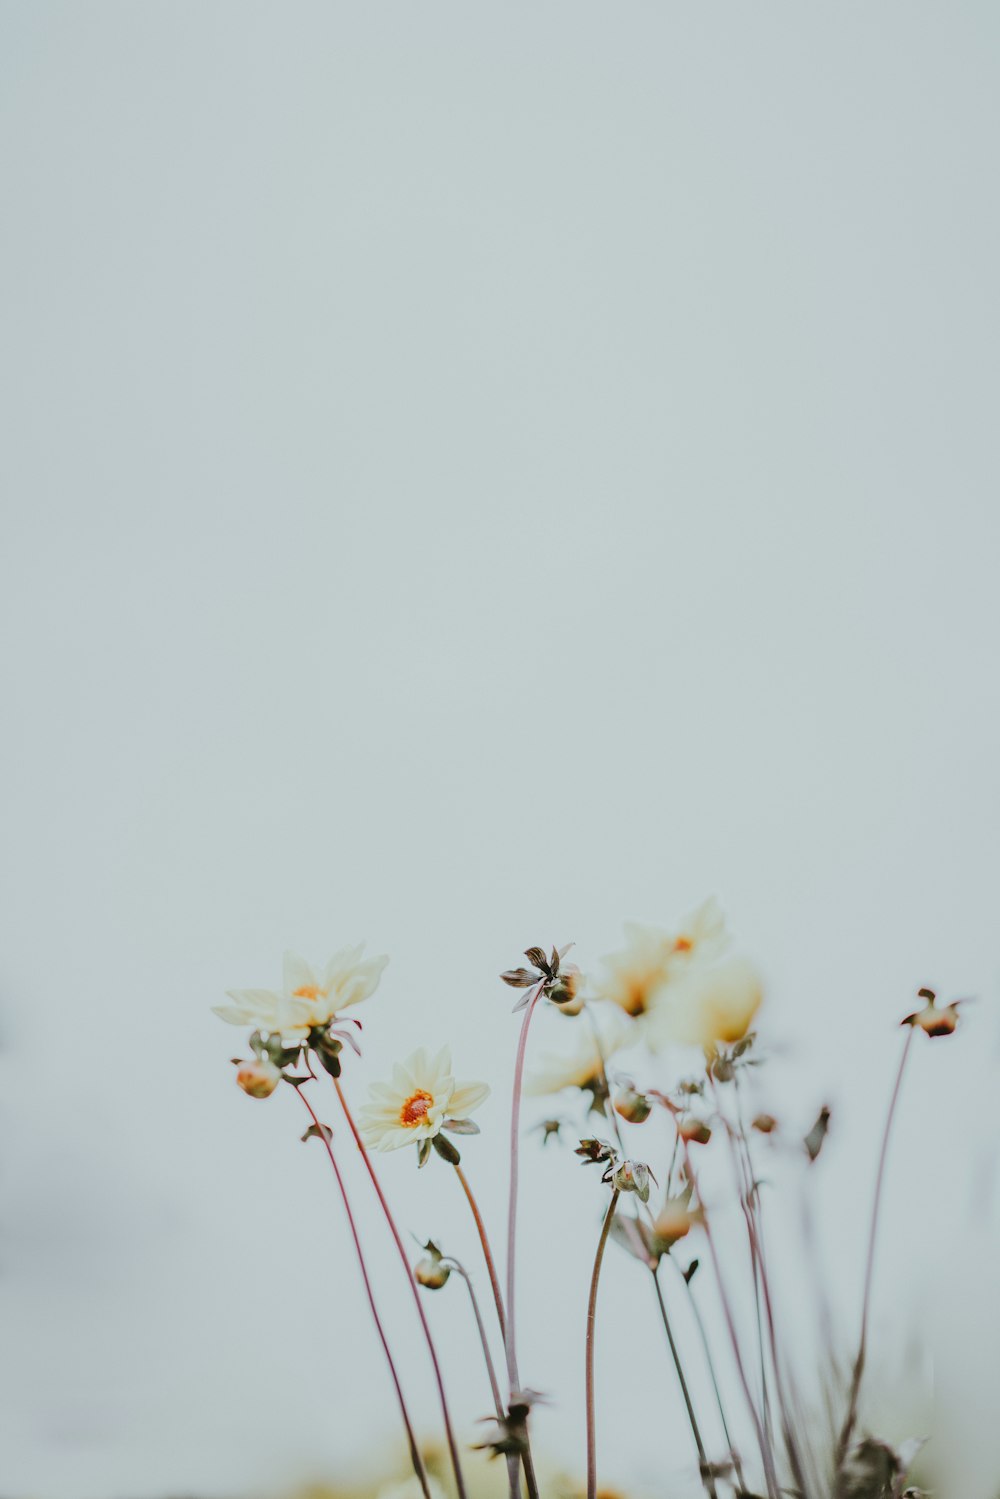 Simple Flower Pictures | Download Free Images on Unsplash